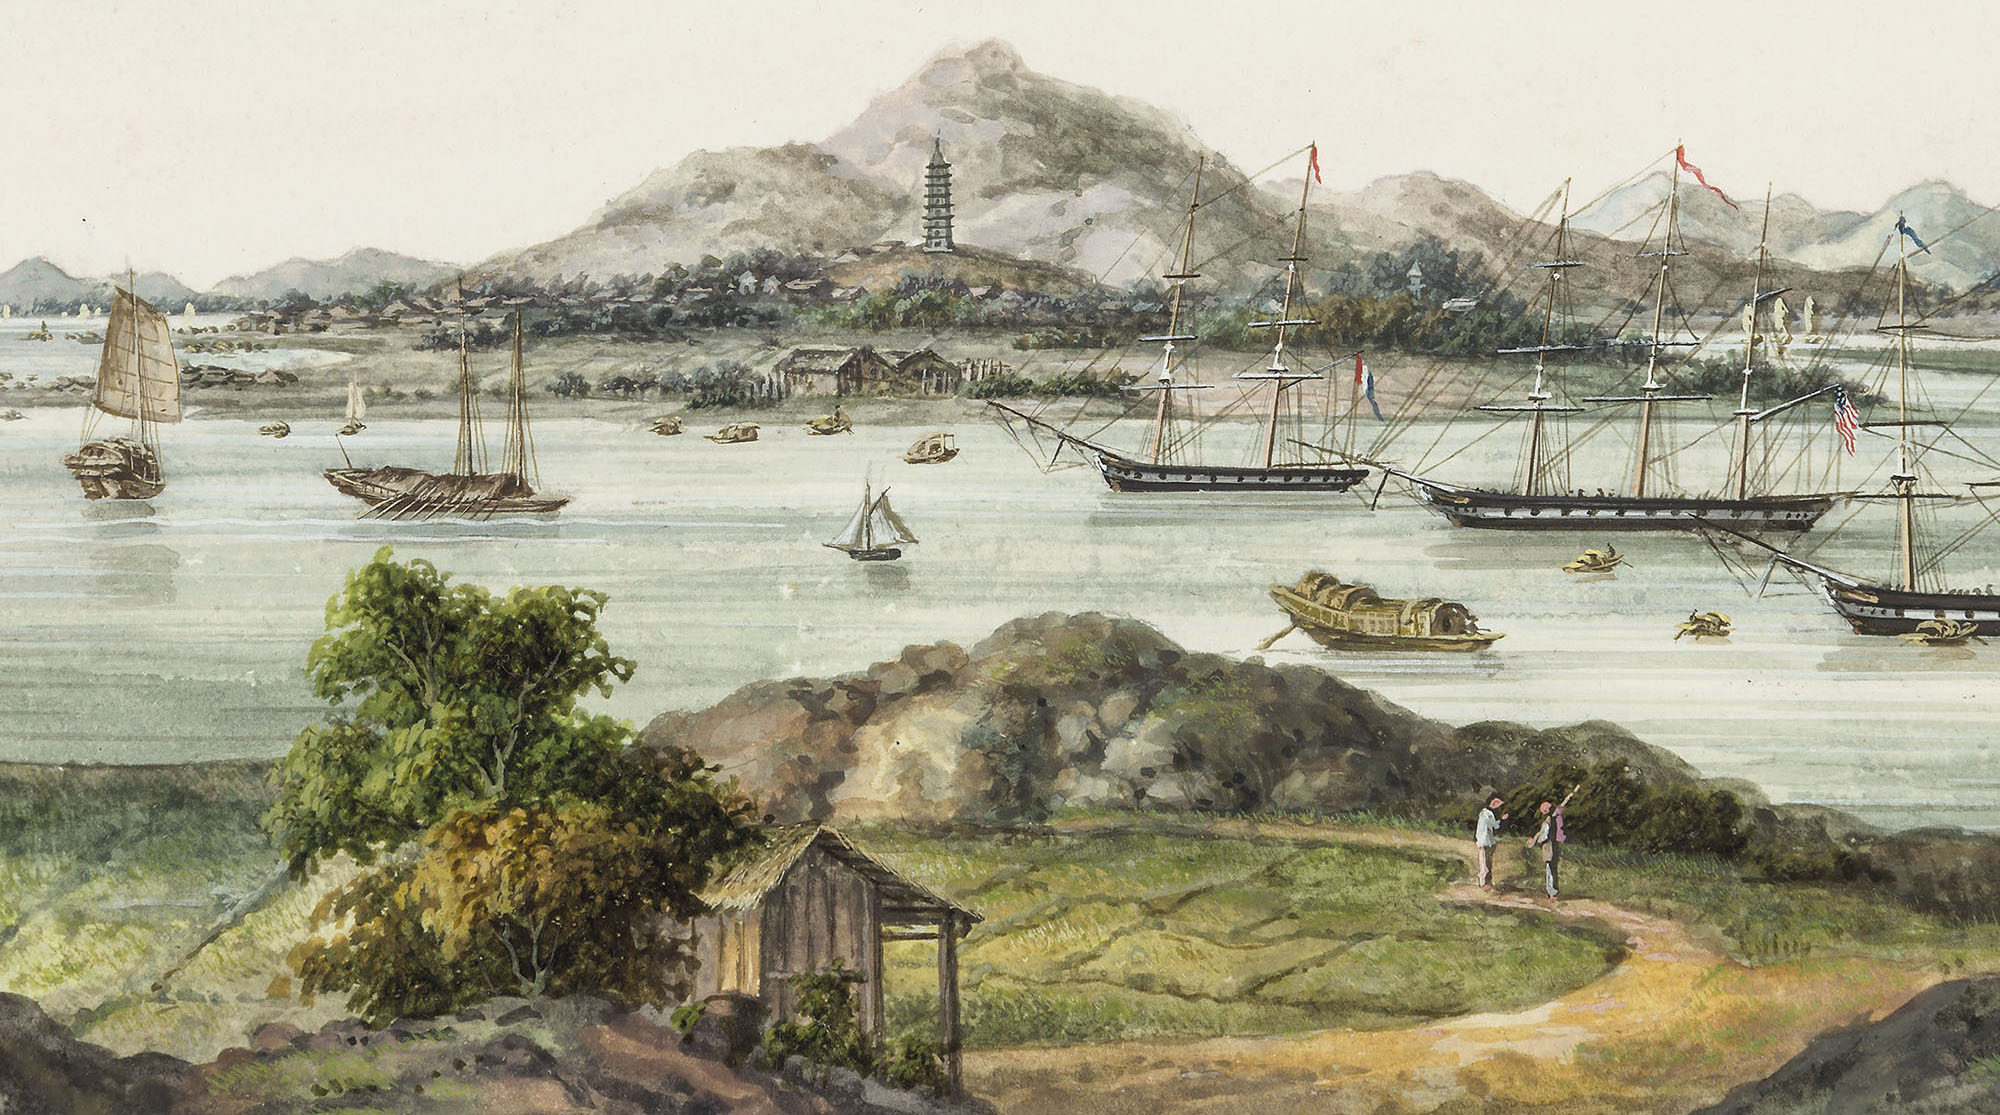 Painting of Macao harbor with boats